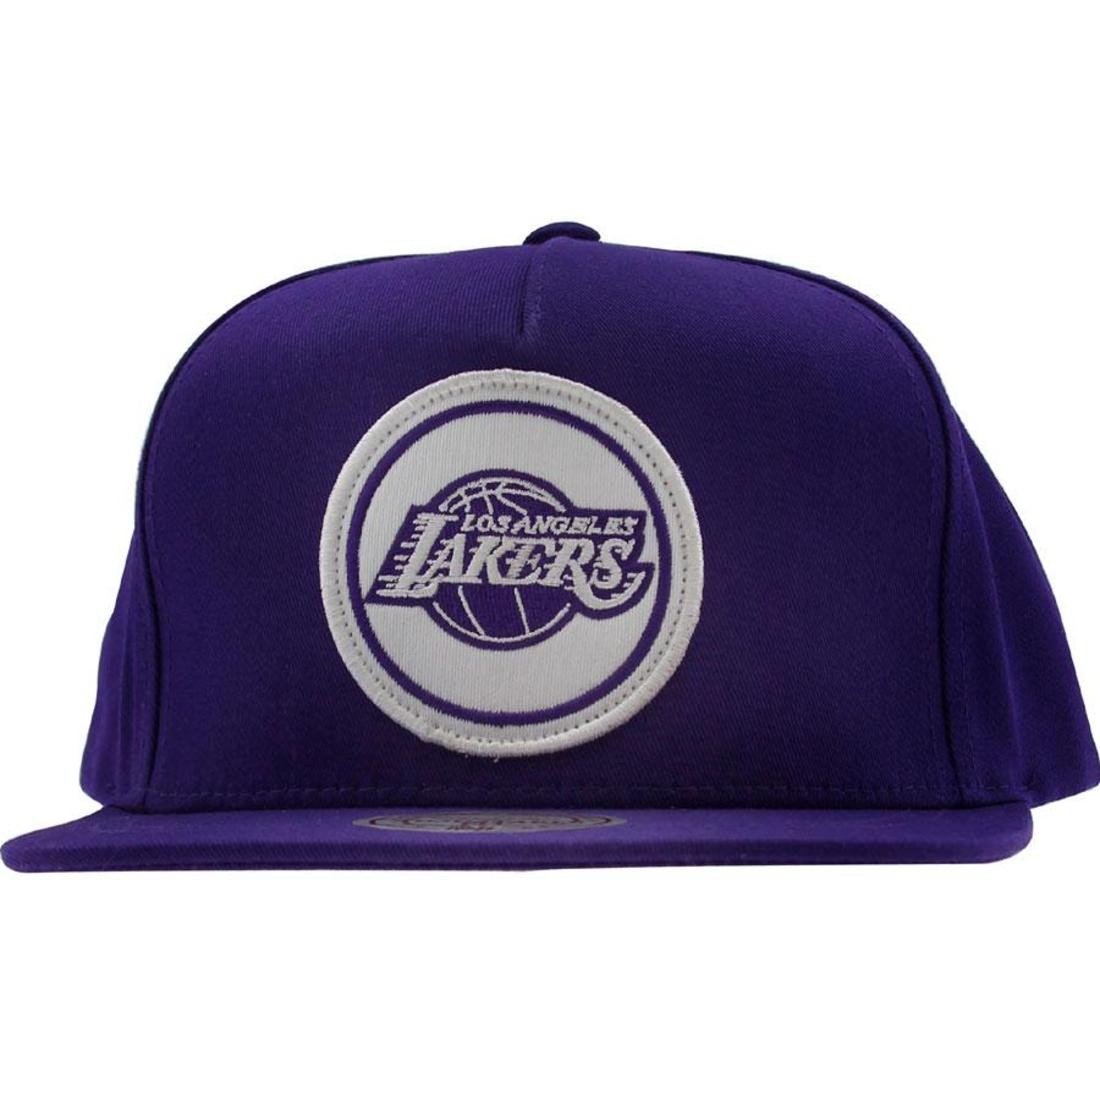 Mitchell And Ness Los Angeles Lakers NBA Cotton Novelty Patch Pinch Snapback Cap (purple)